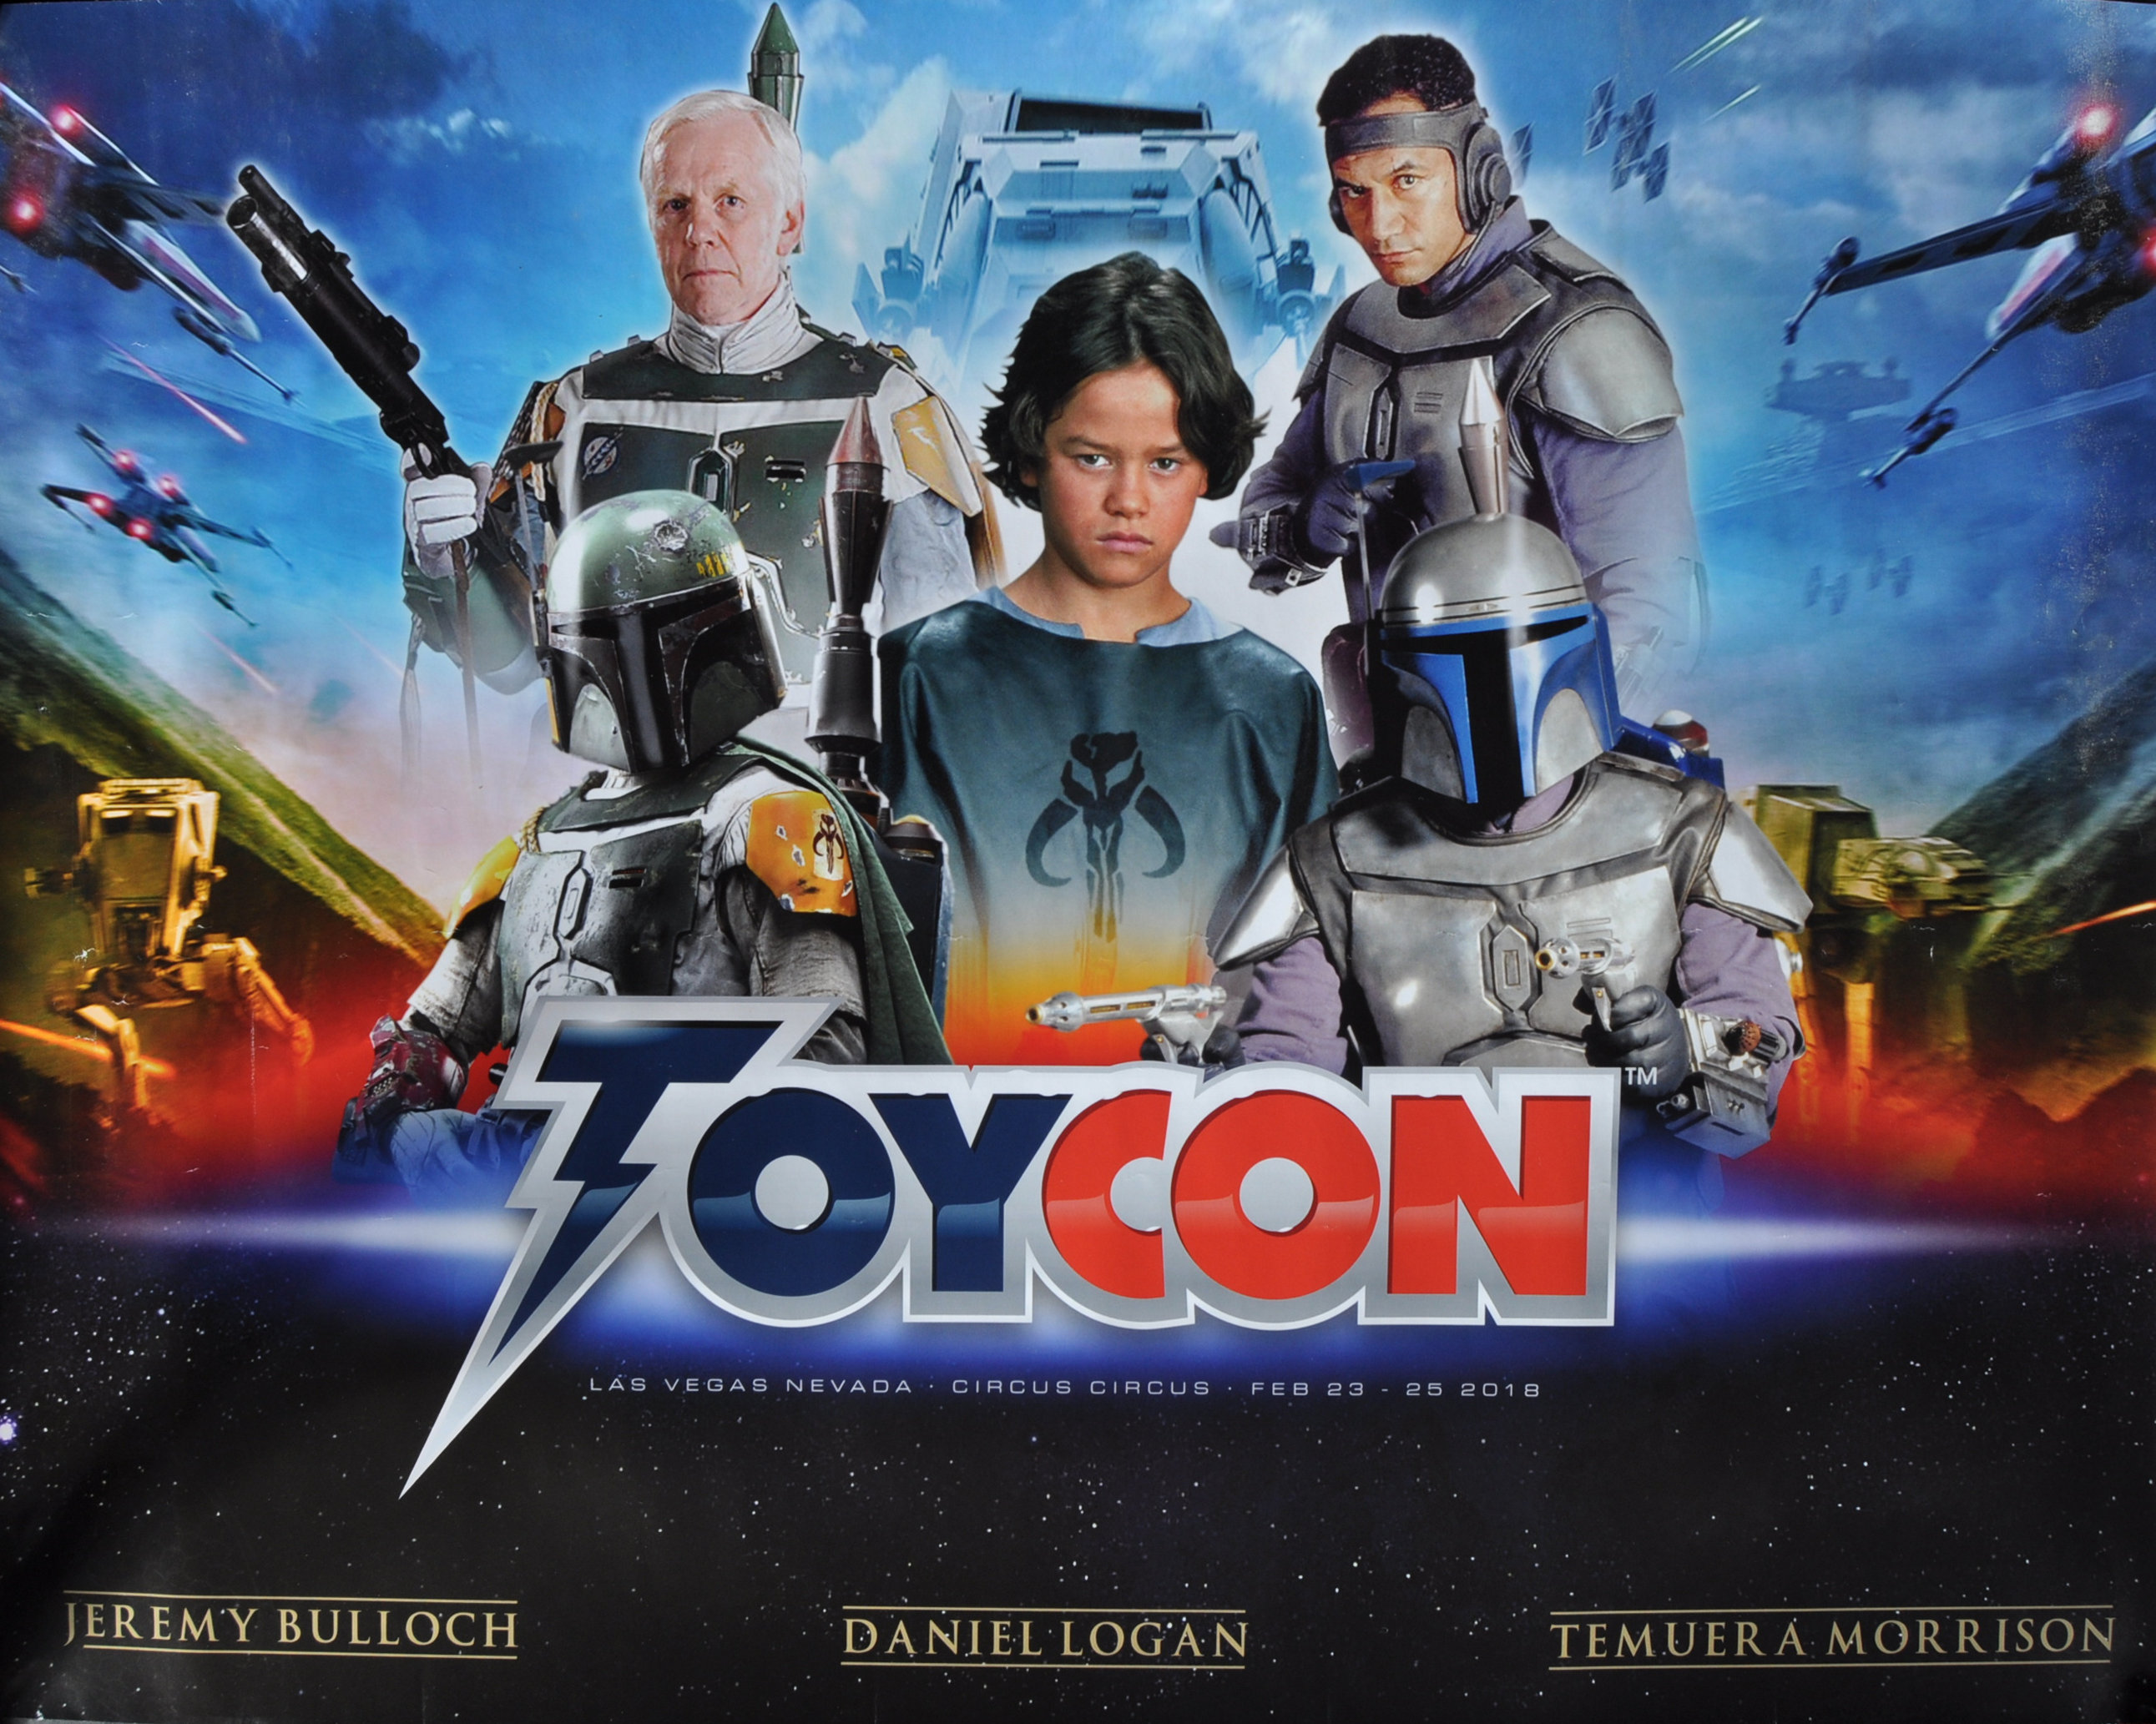 ESTATE OF JEREMY BULLOCH - STAR WARS - CONVENTION POSTERS - Image 2 of 14